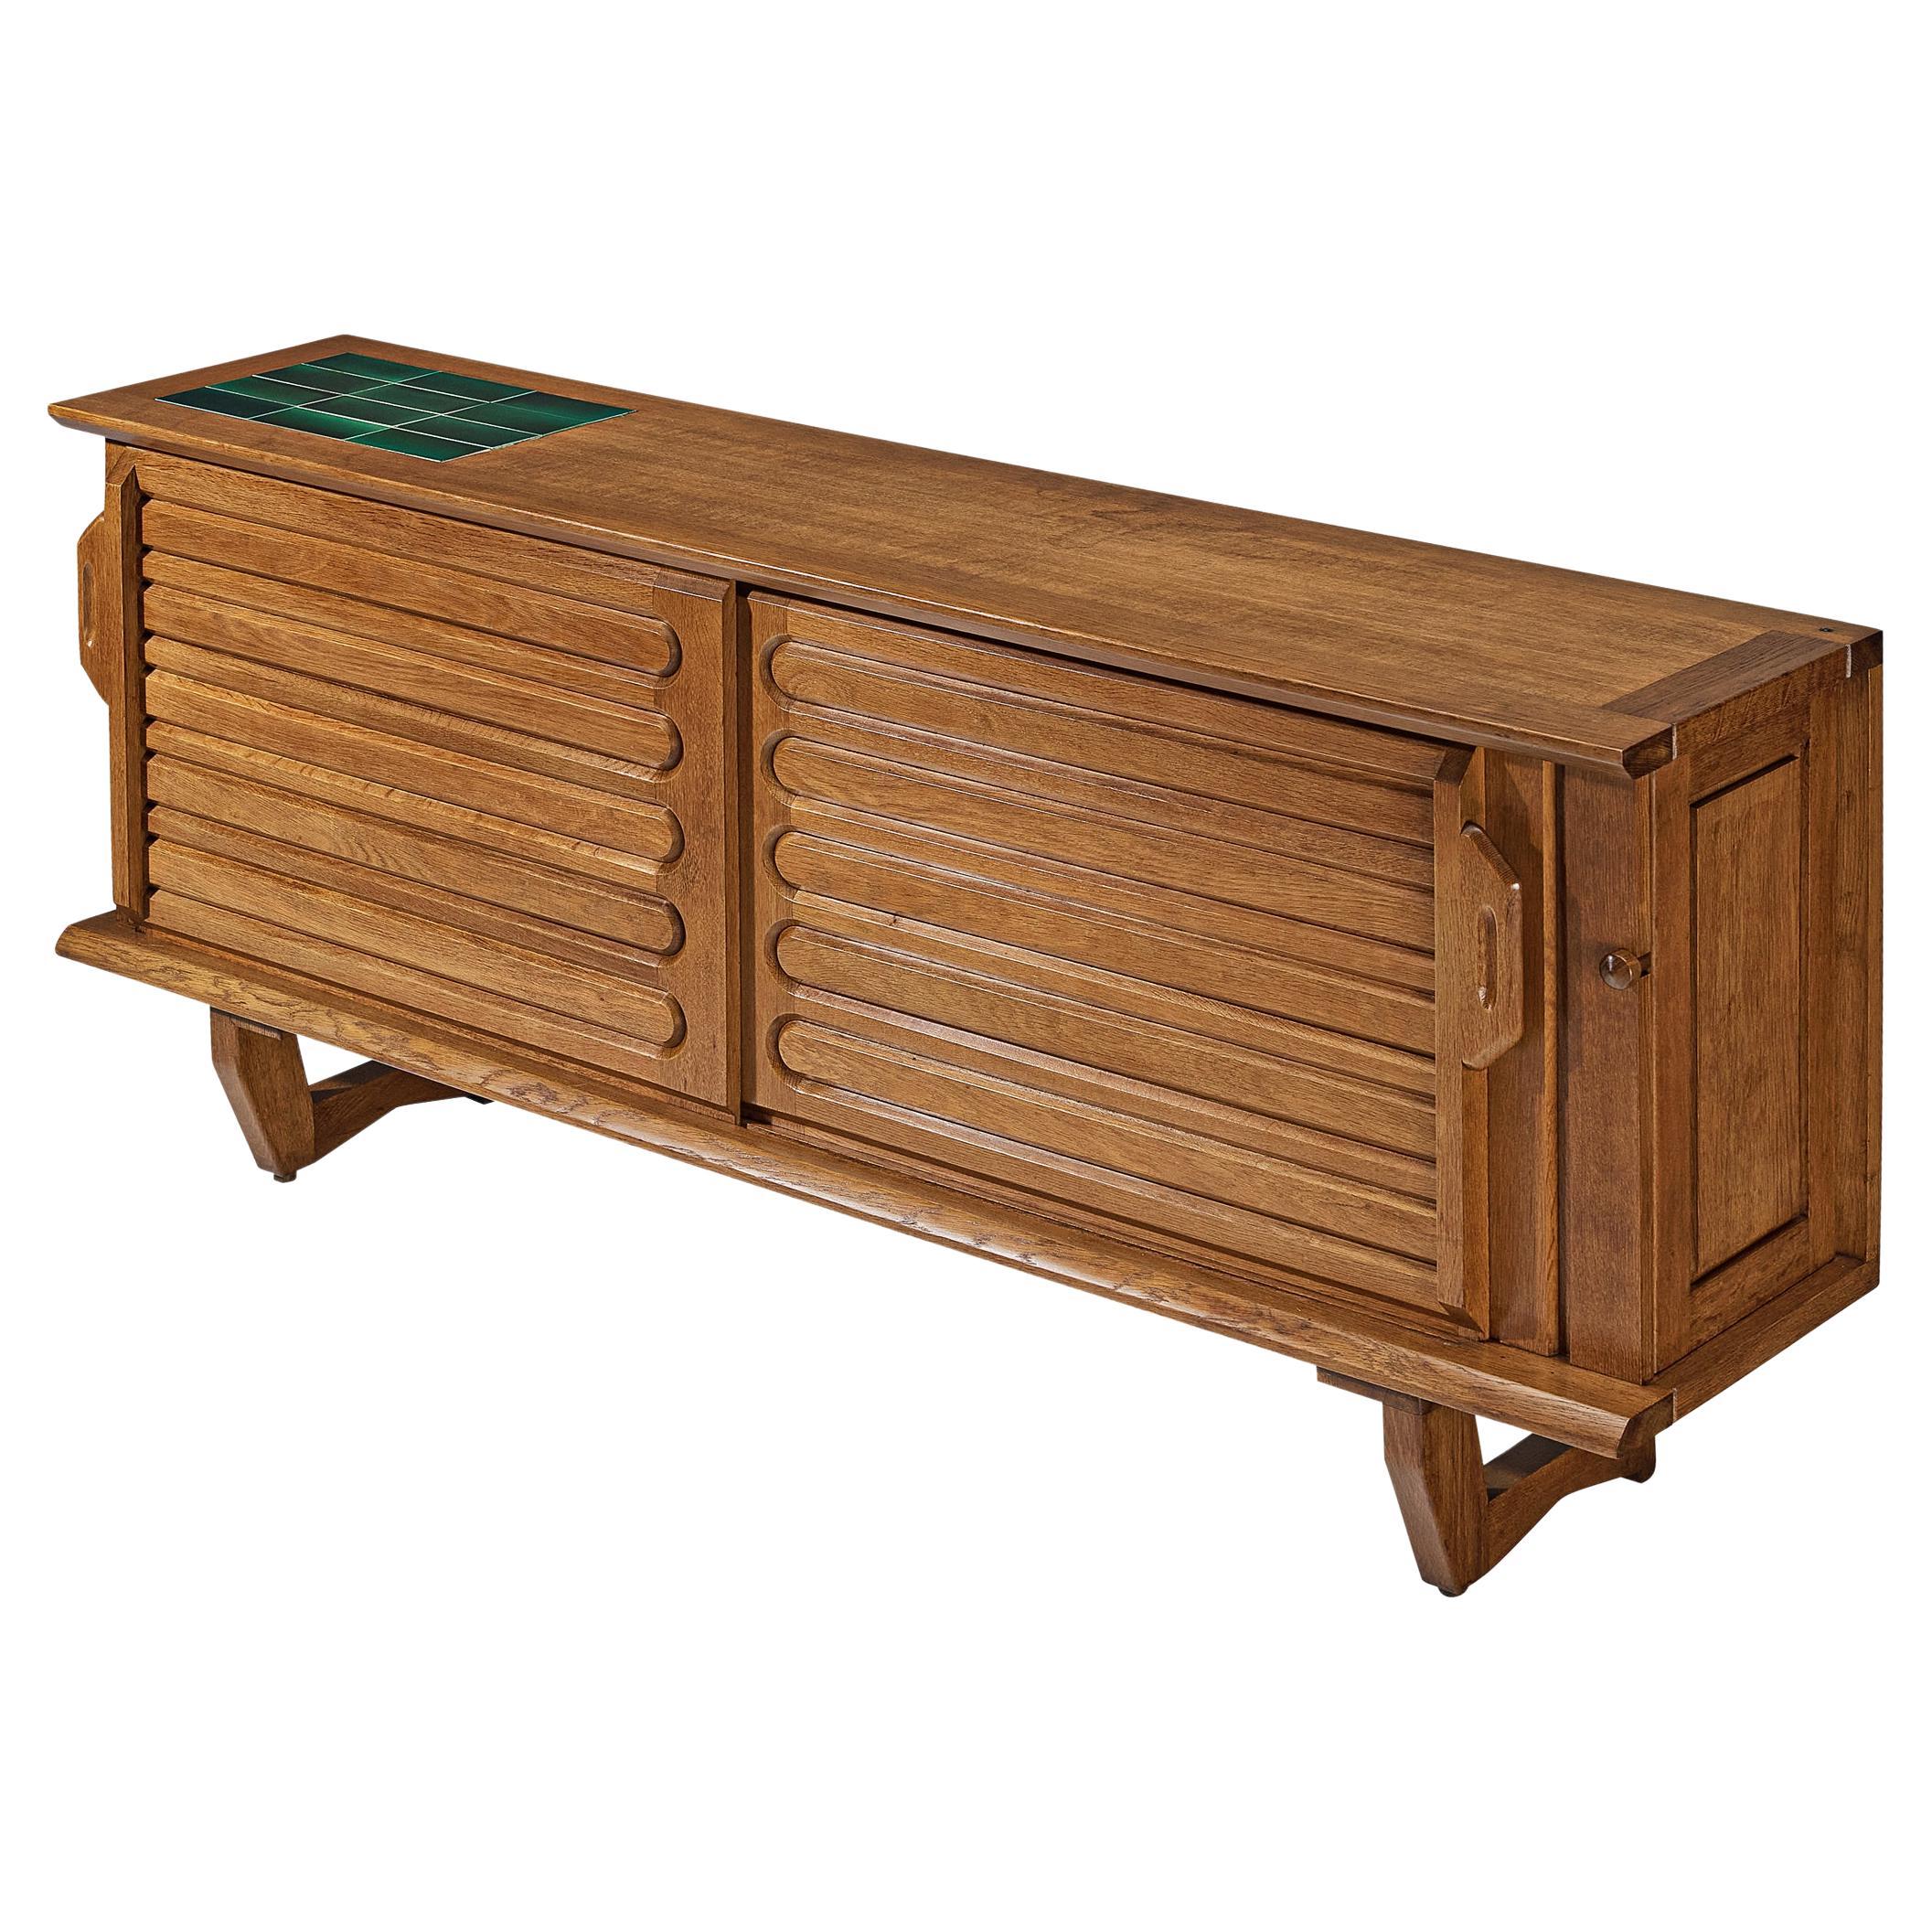 Guillerme & Chambron Sideboard in Oak with Green Ceramic Tiles